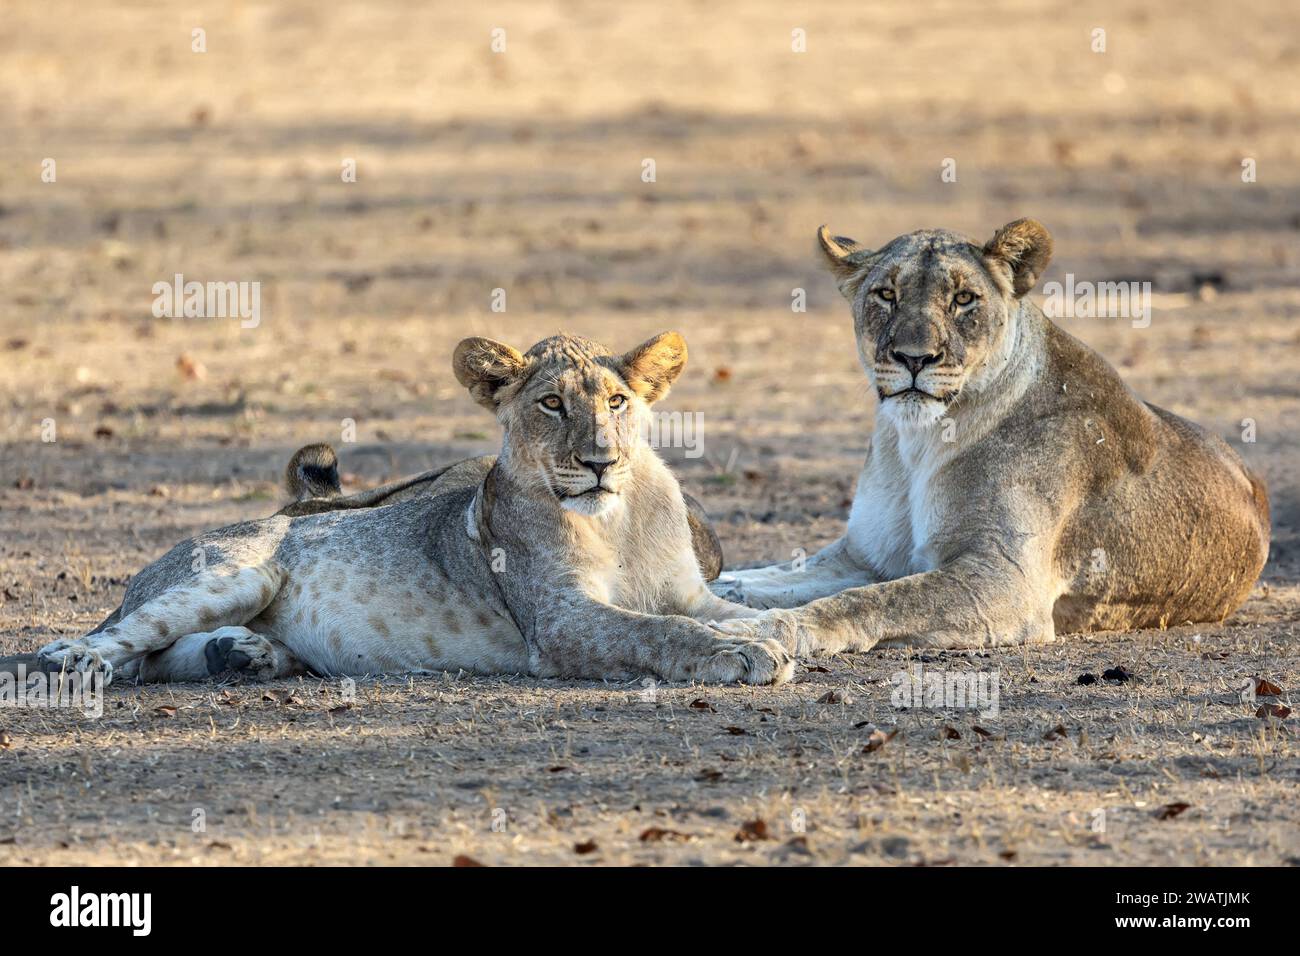 Lioness & Cub, Pride of Lions, Liwonde National Park, Malawi Foto Stock